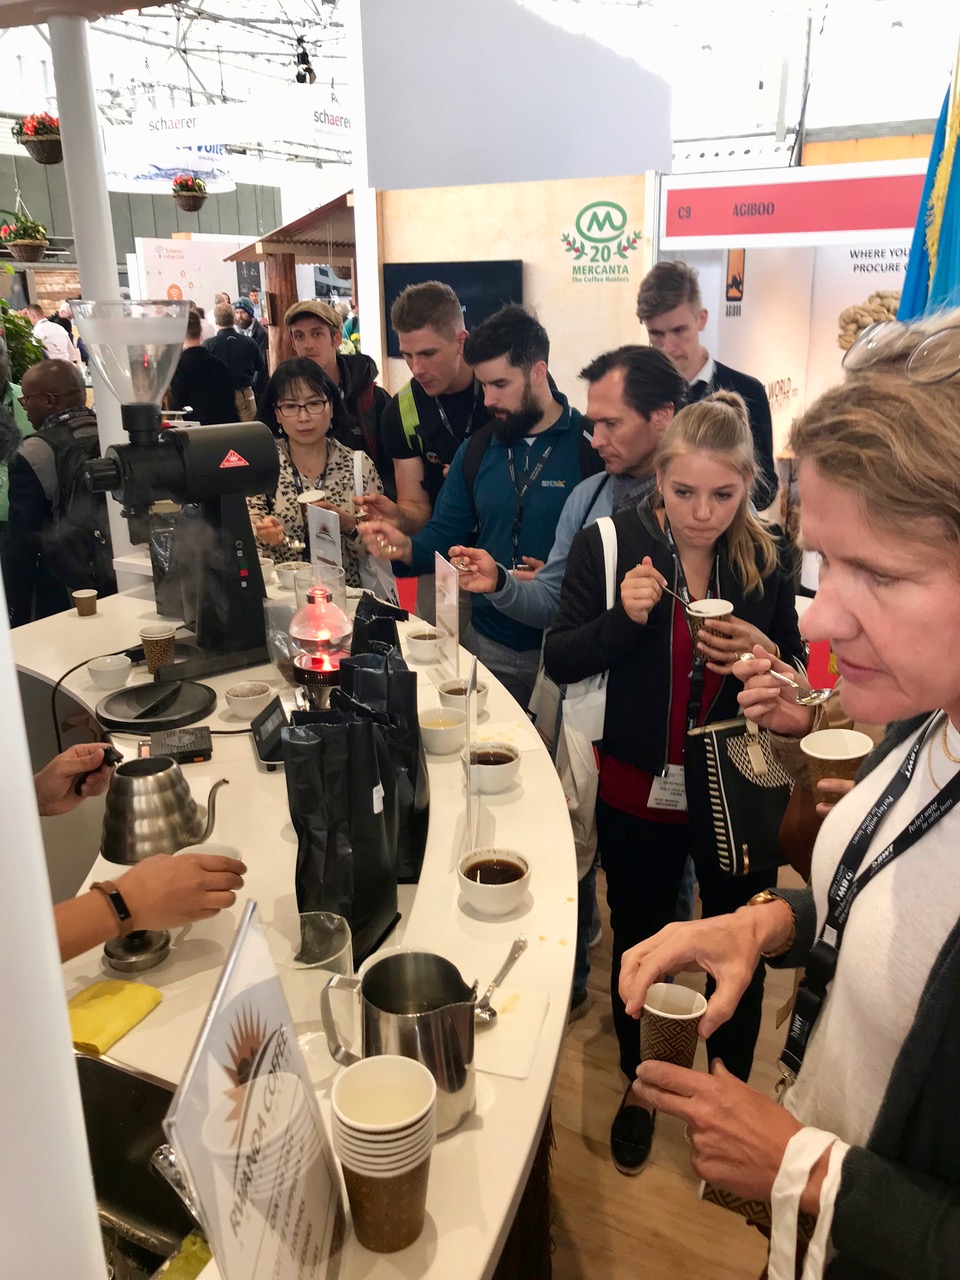 People taste Rwandaâ€™s specialty coffee at the exhibition in Amsterdam. Courtesy.